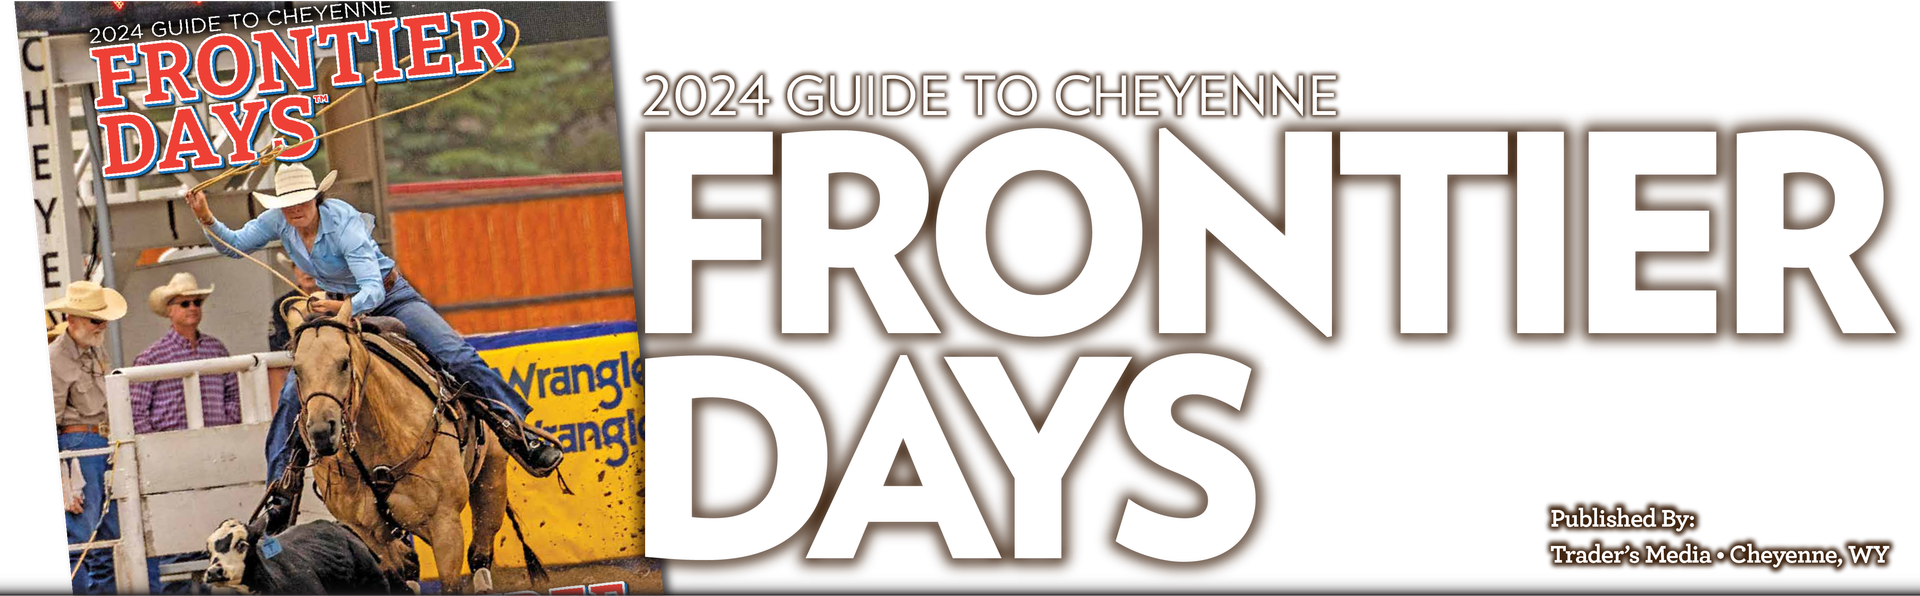 Frontier Days Guide